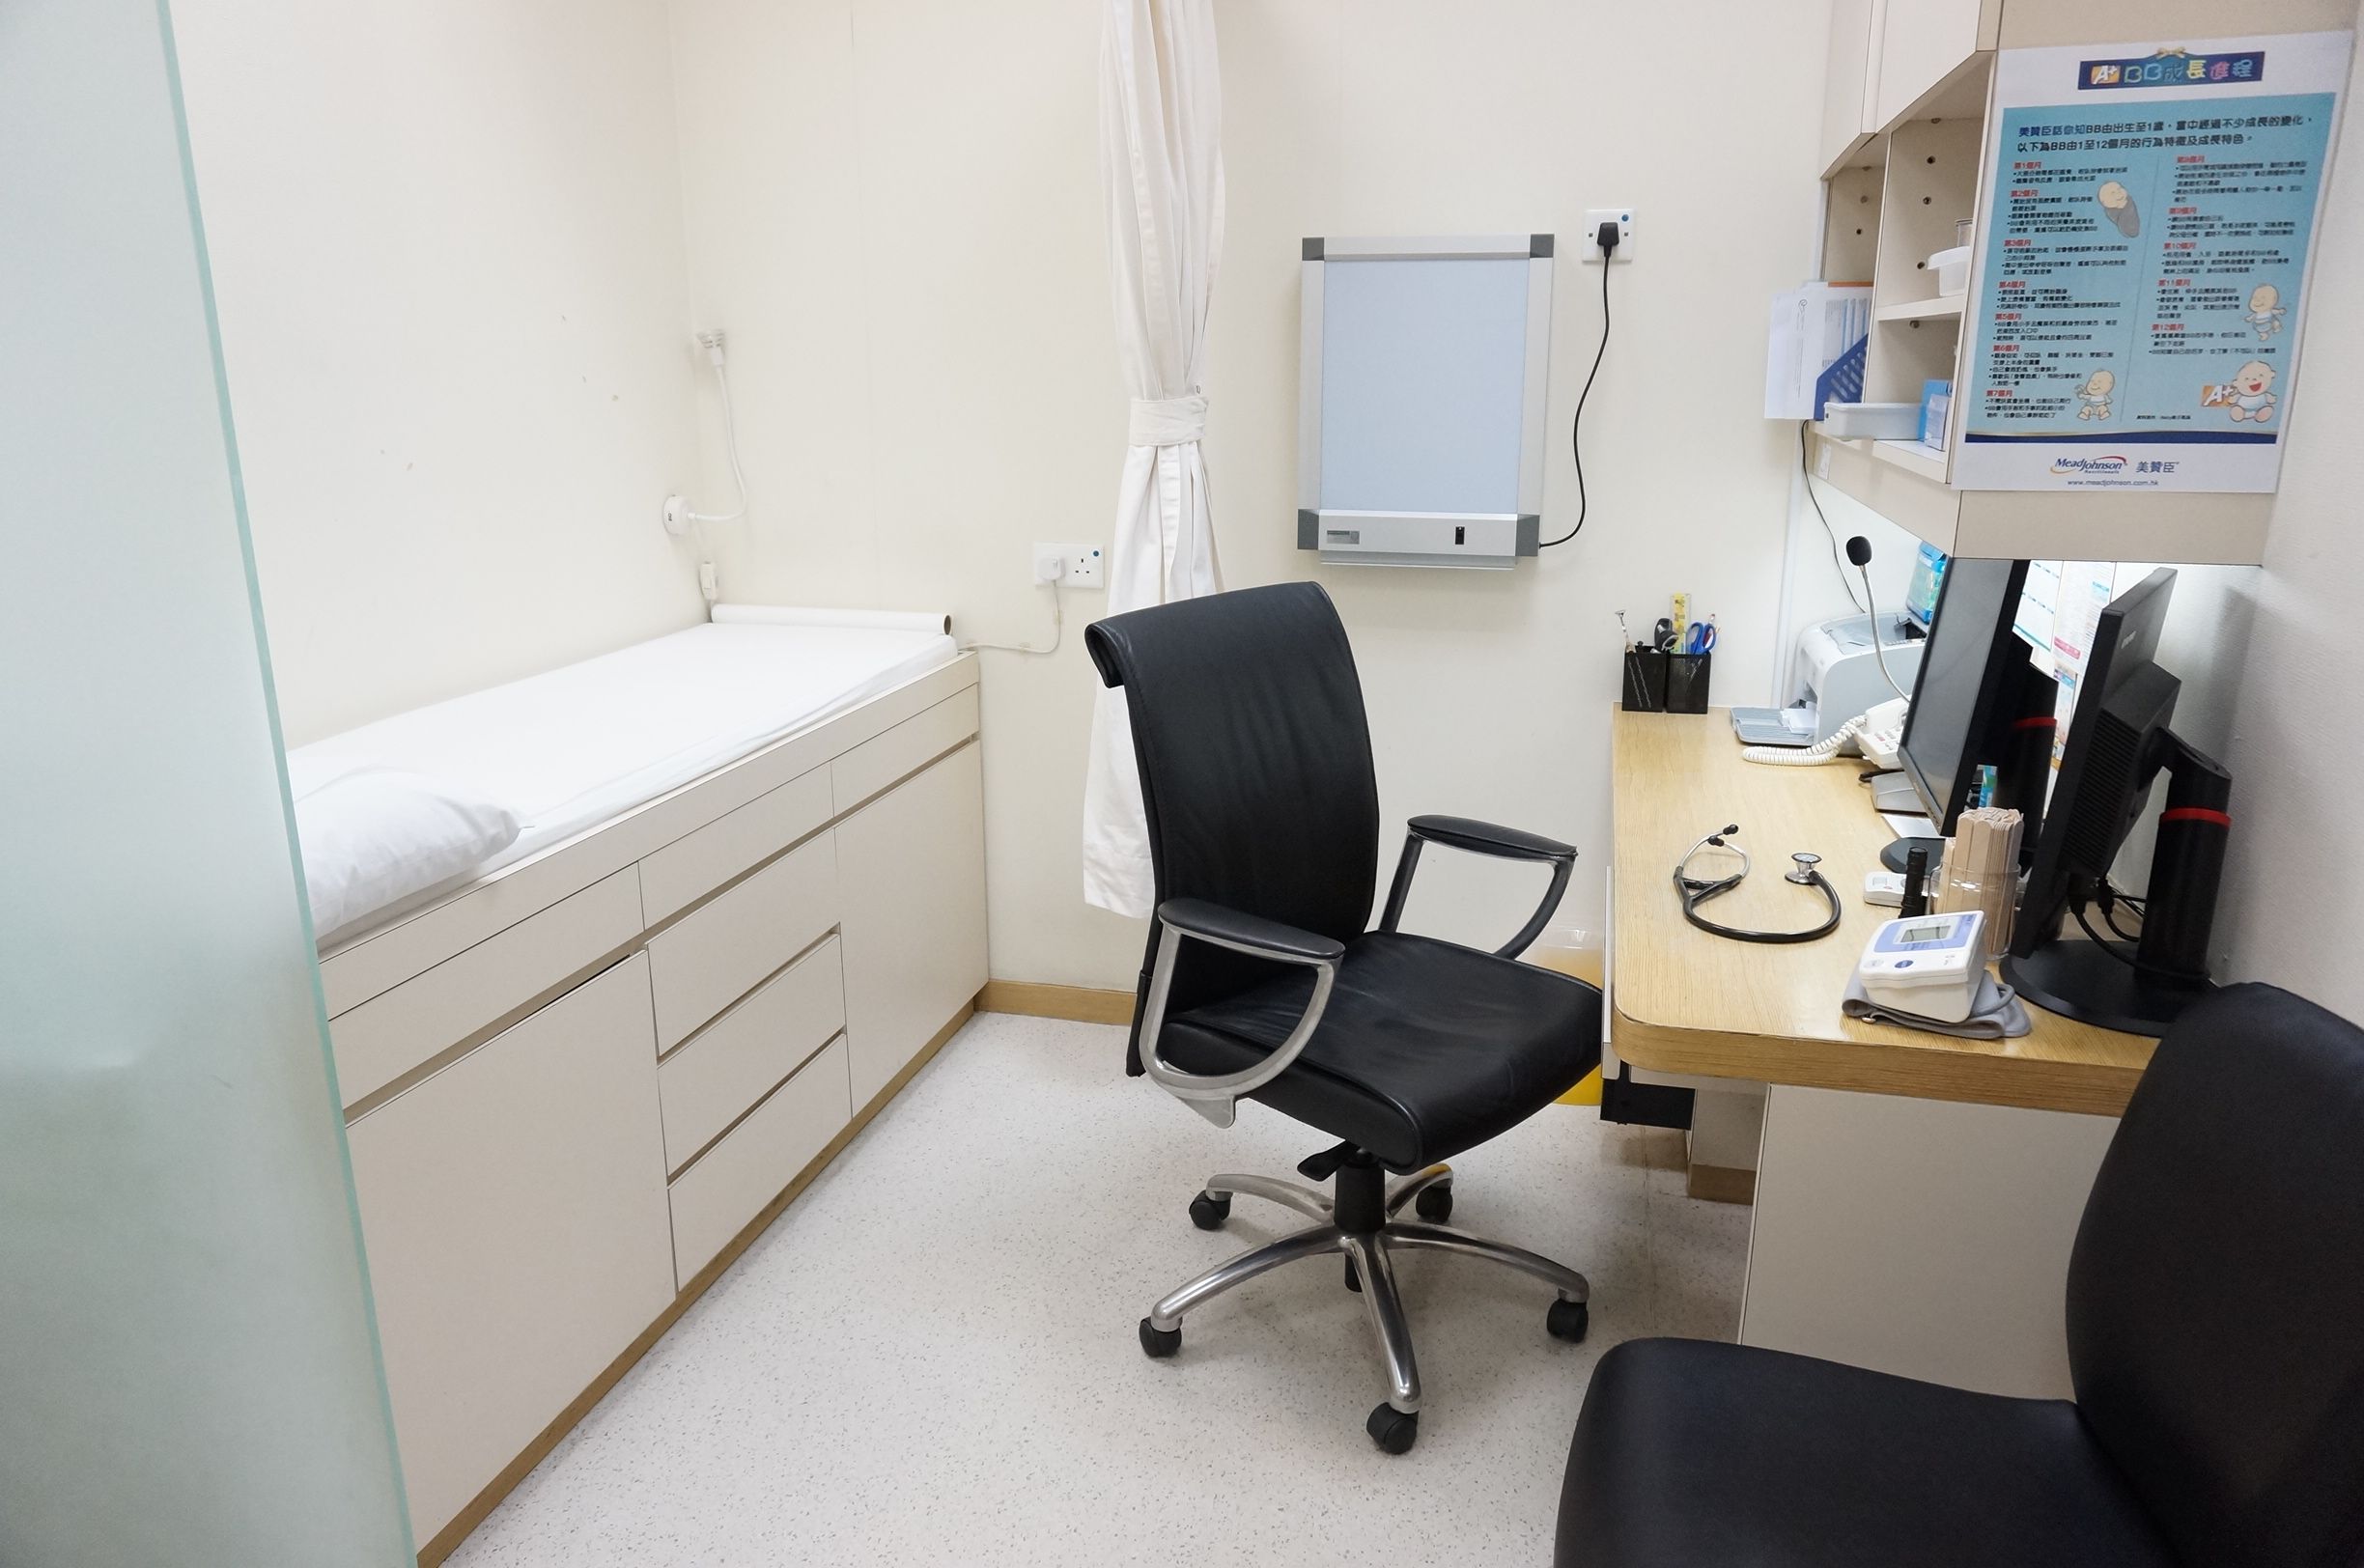 Consultation room with patient bed, desk